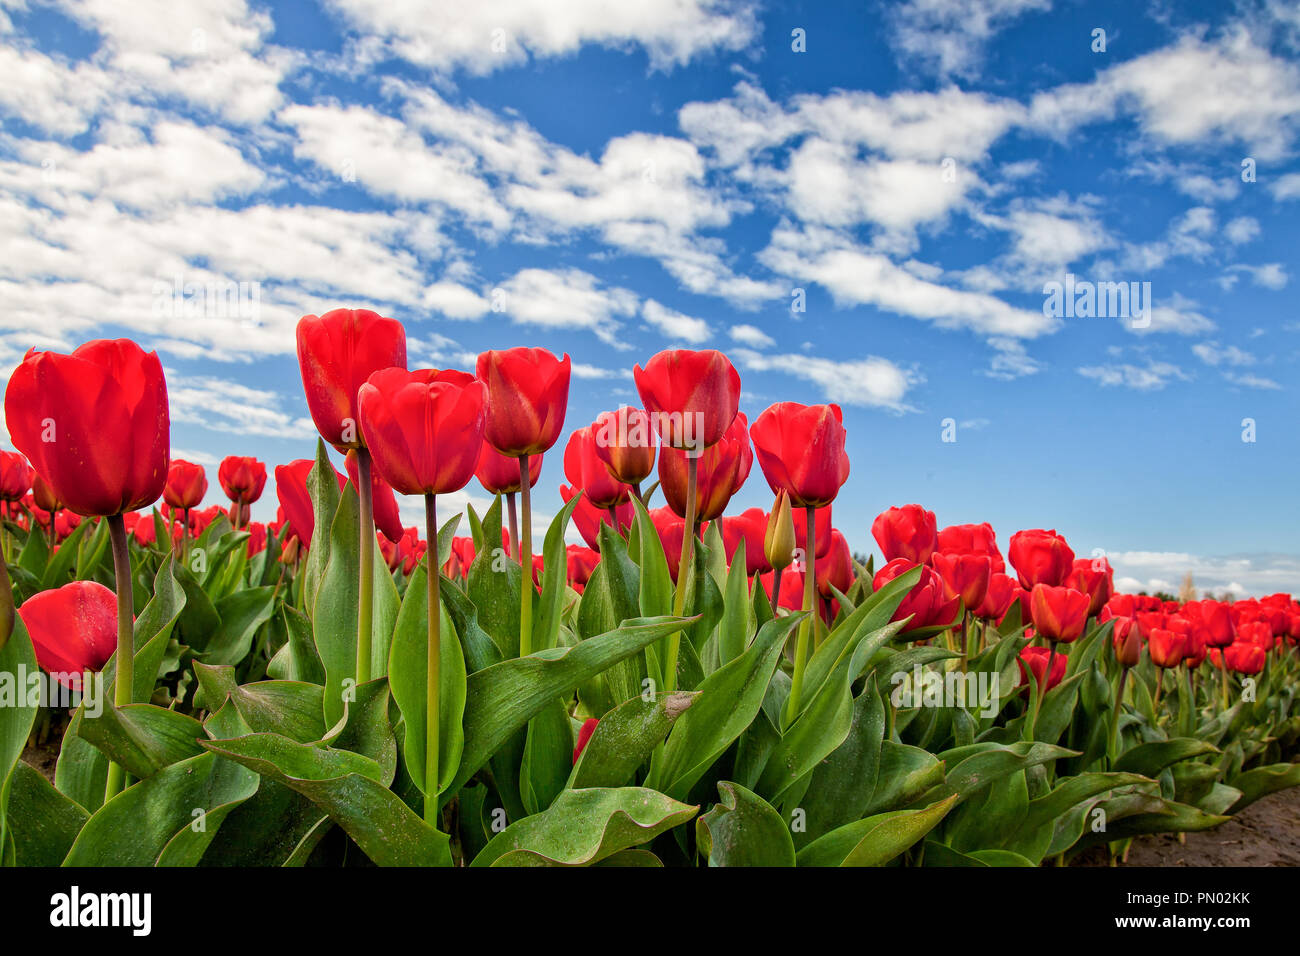 Red tulips blooming in Mount Vernon, Washington in the Skagit Valley Stock Photo